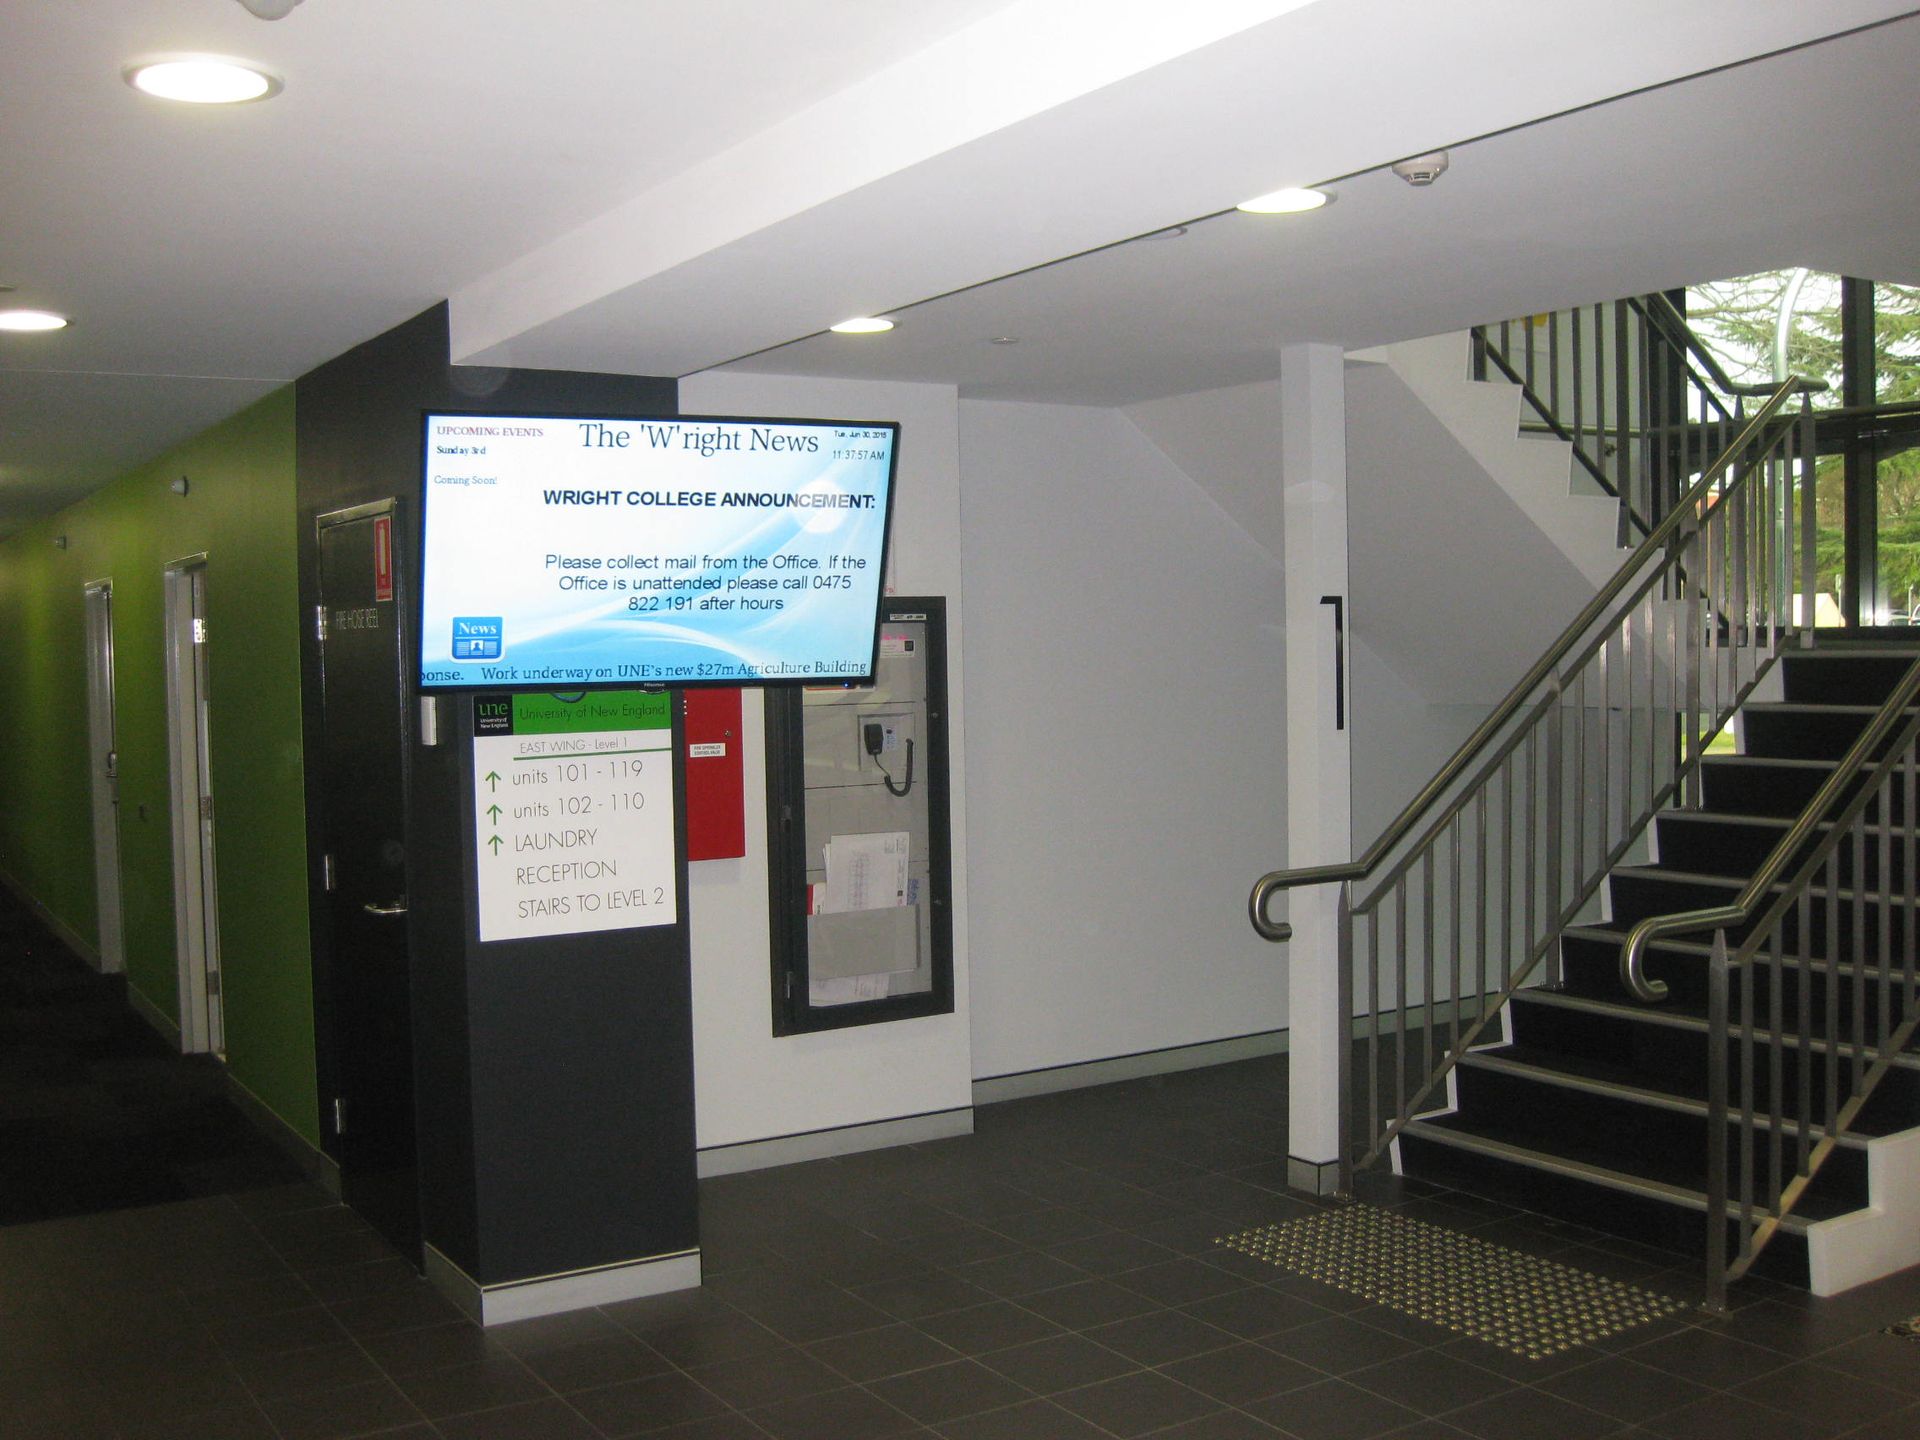 a hallway with stairs and a tv on the wall showing announcements from wright college in armidale